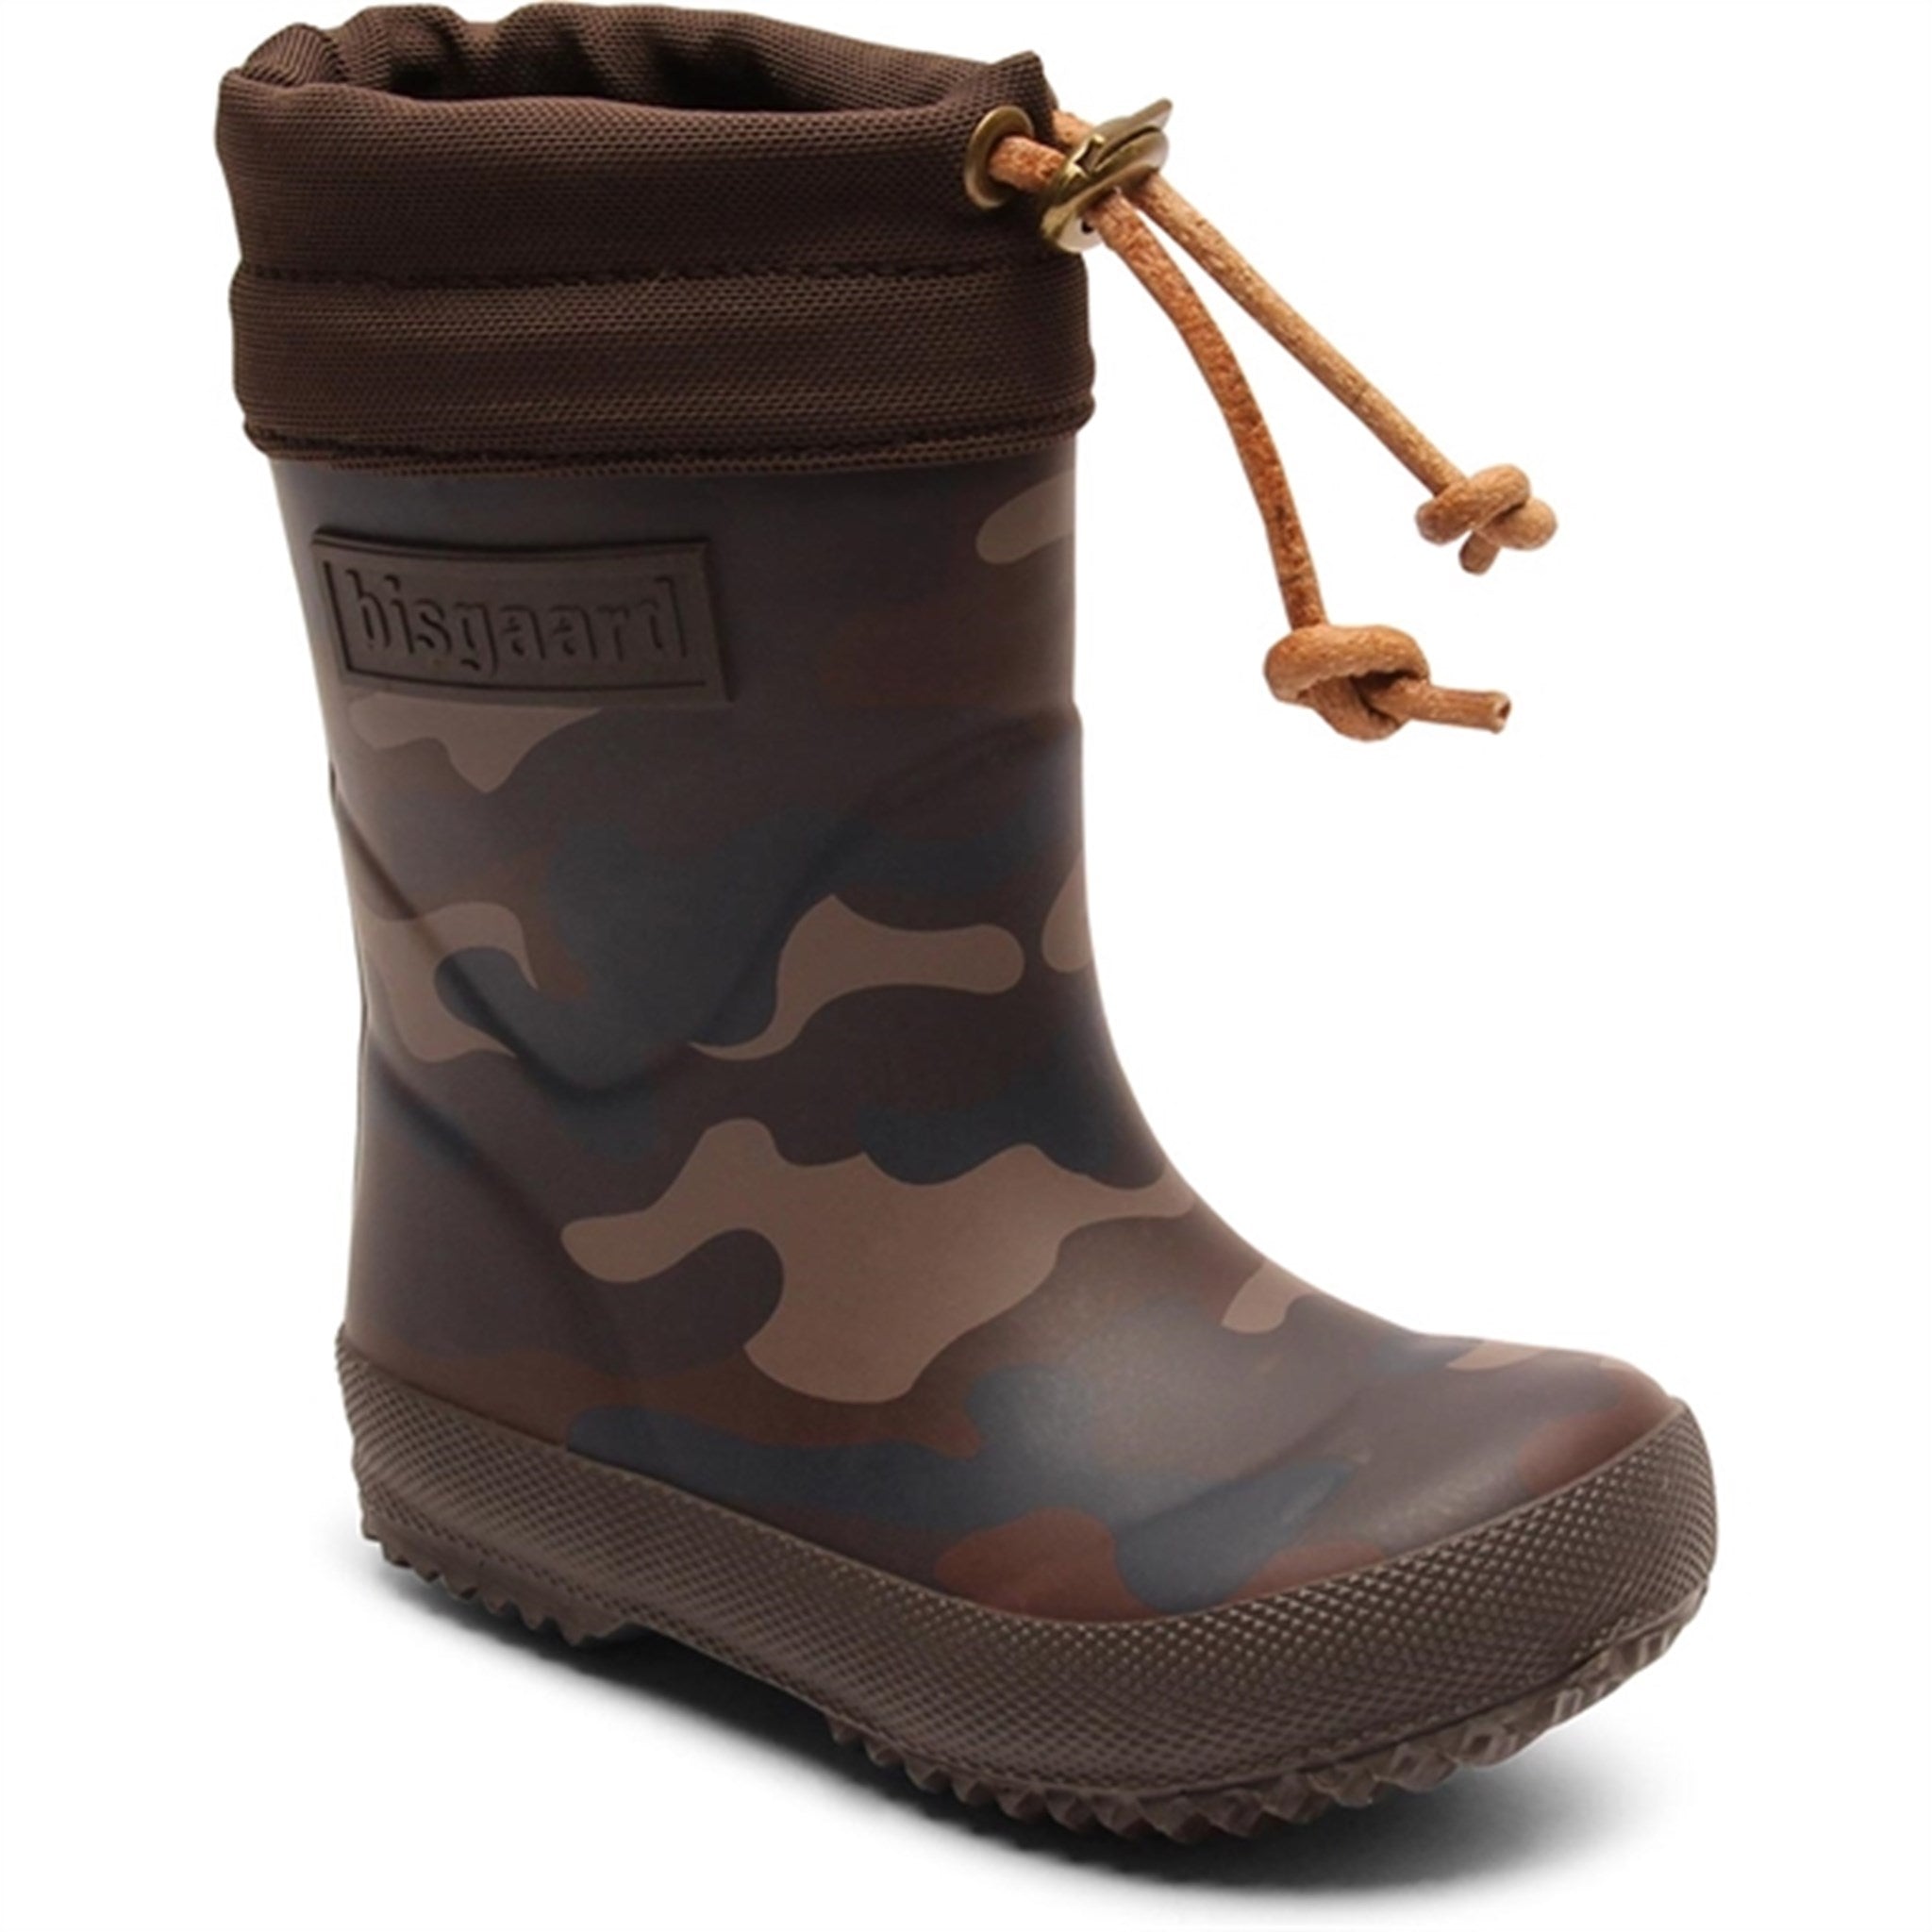 Bisgaard Winter Thermo Rubber Boots Army